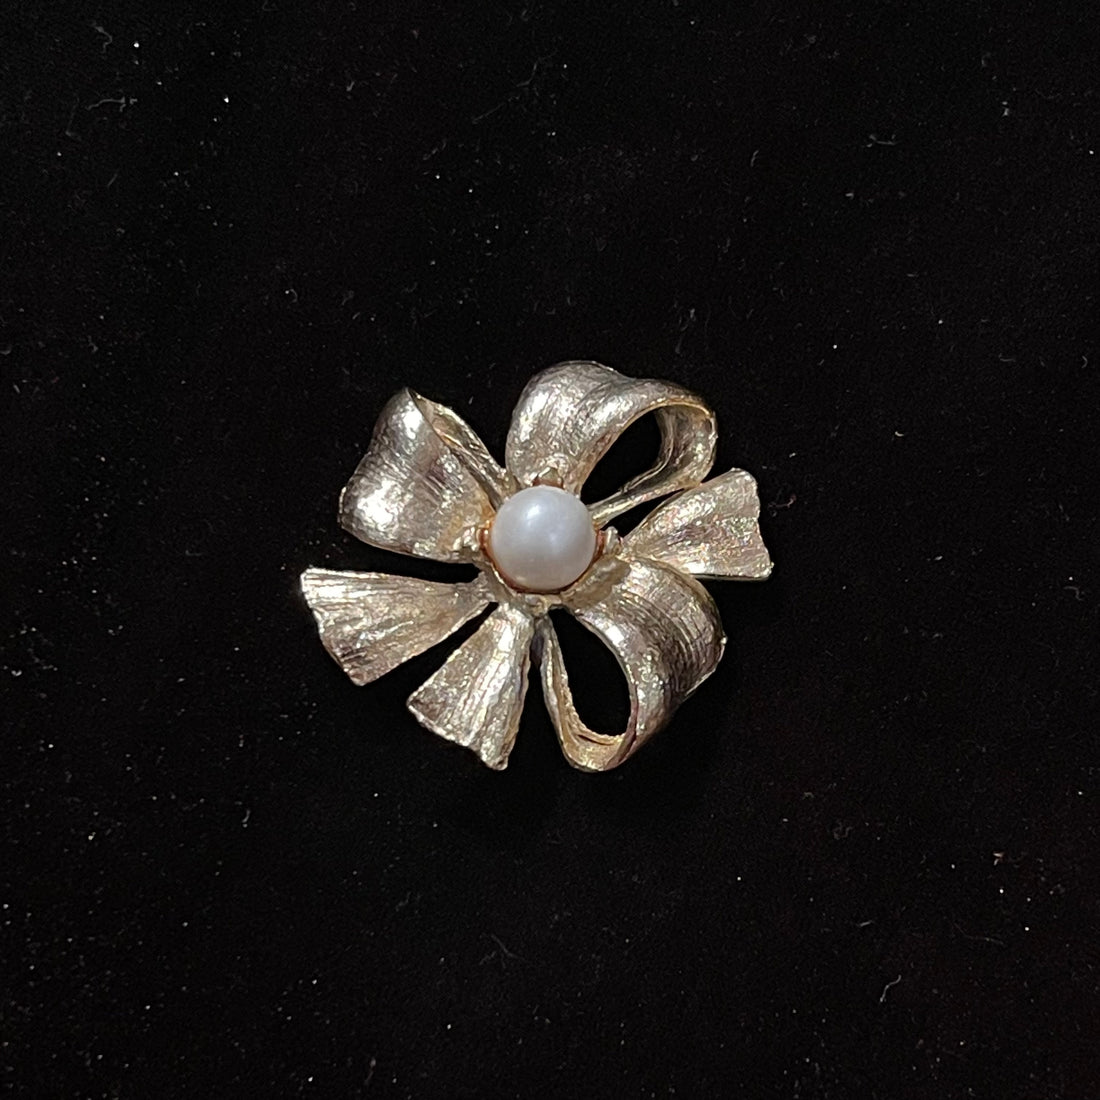 Vintage Iridescent Bow Brooch with Pearl Centerpiece